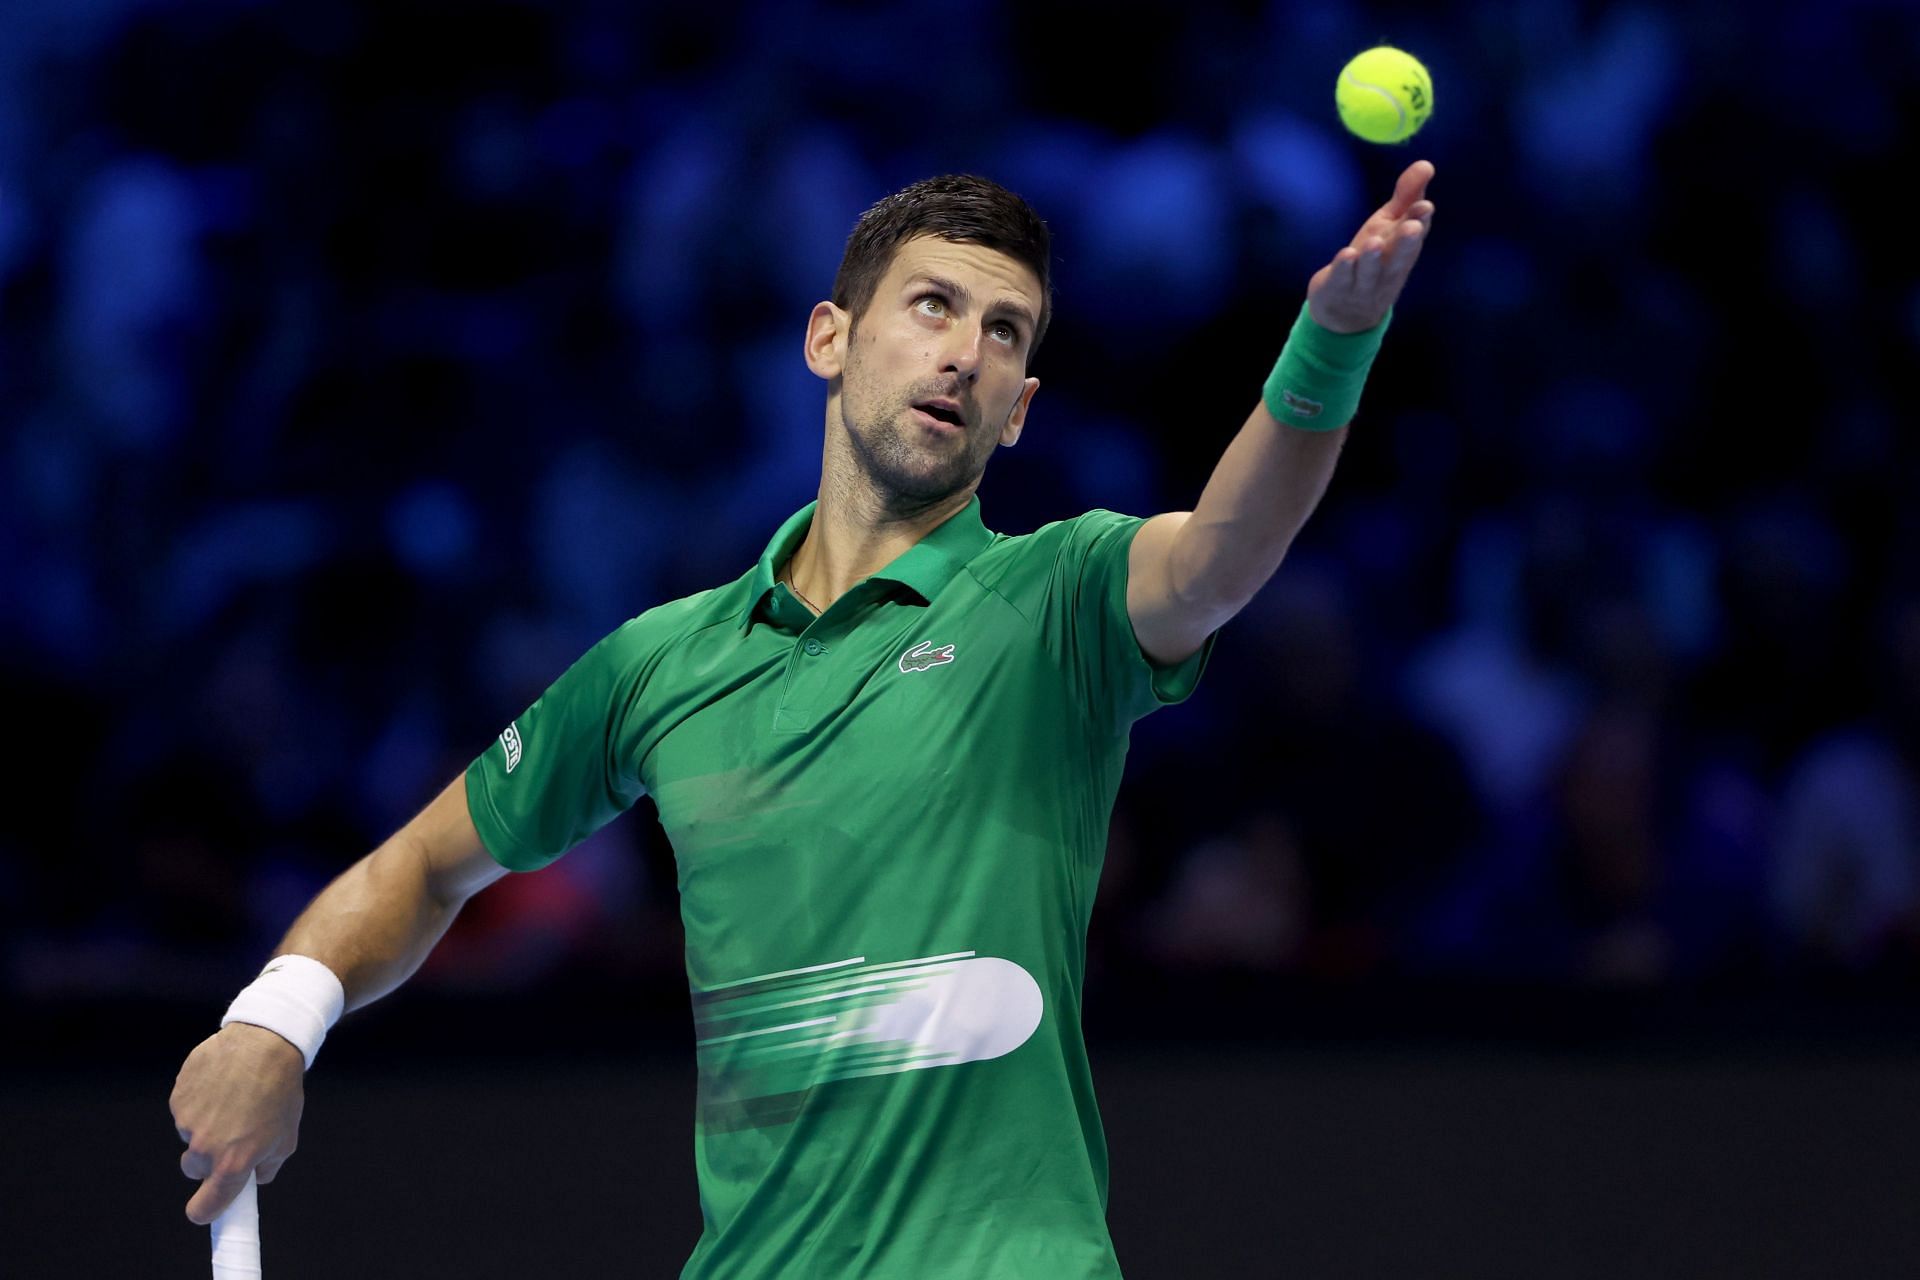 Novak Djokovic in action at the ATP Finals. (PC: Getty Images)